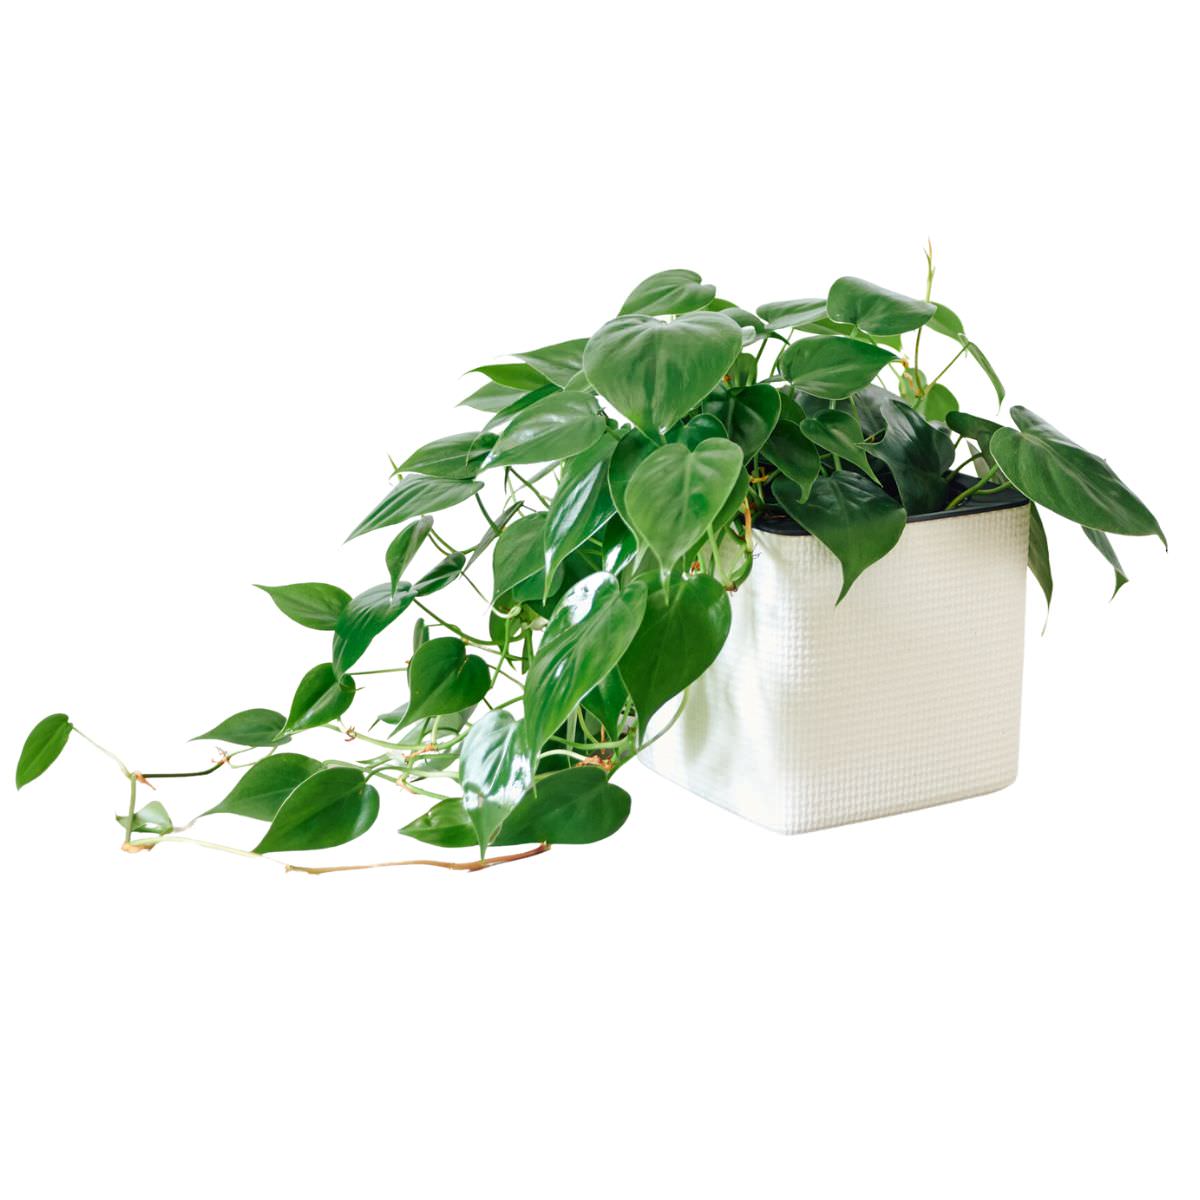 Philodendron Cordatum Placed In Lechuza Cube 16 planter - White - My City Plants